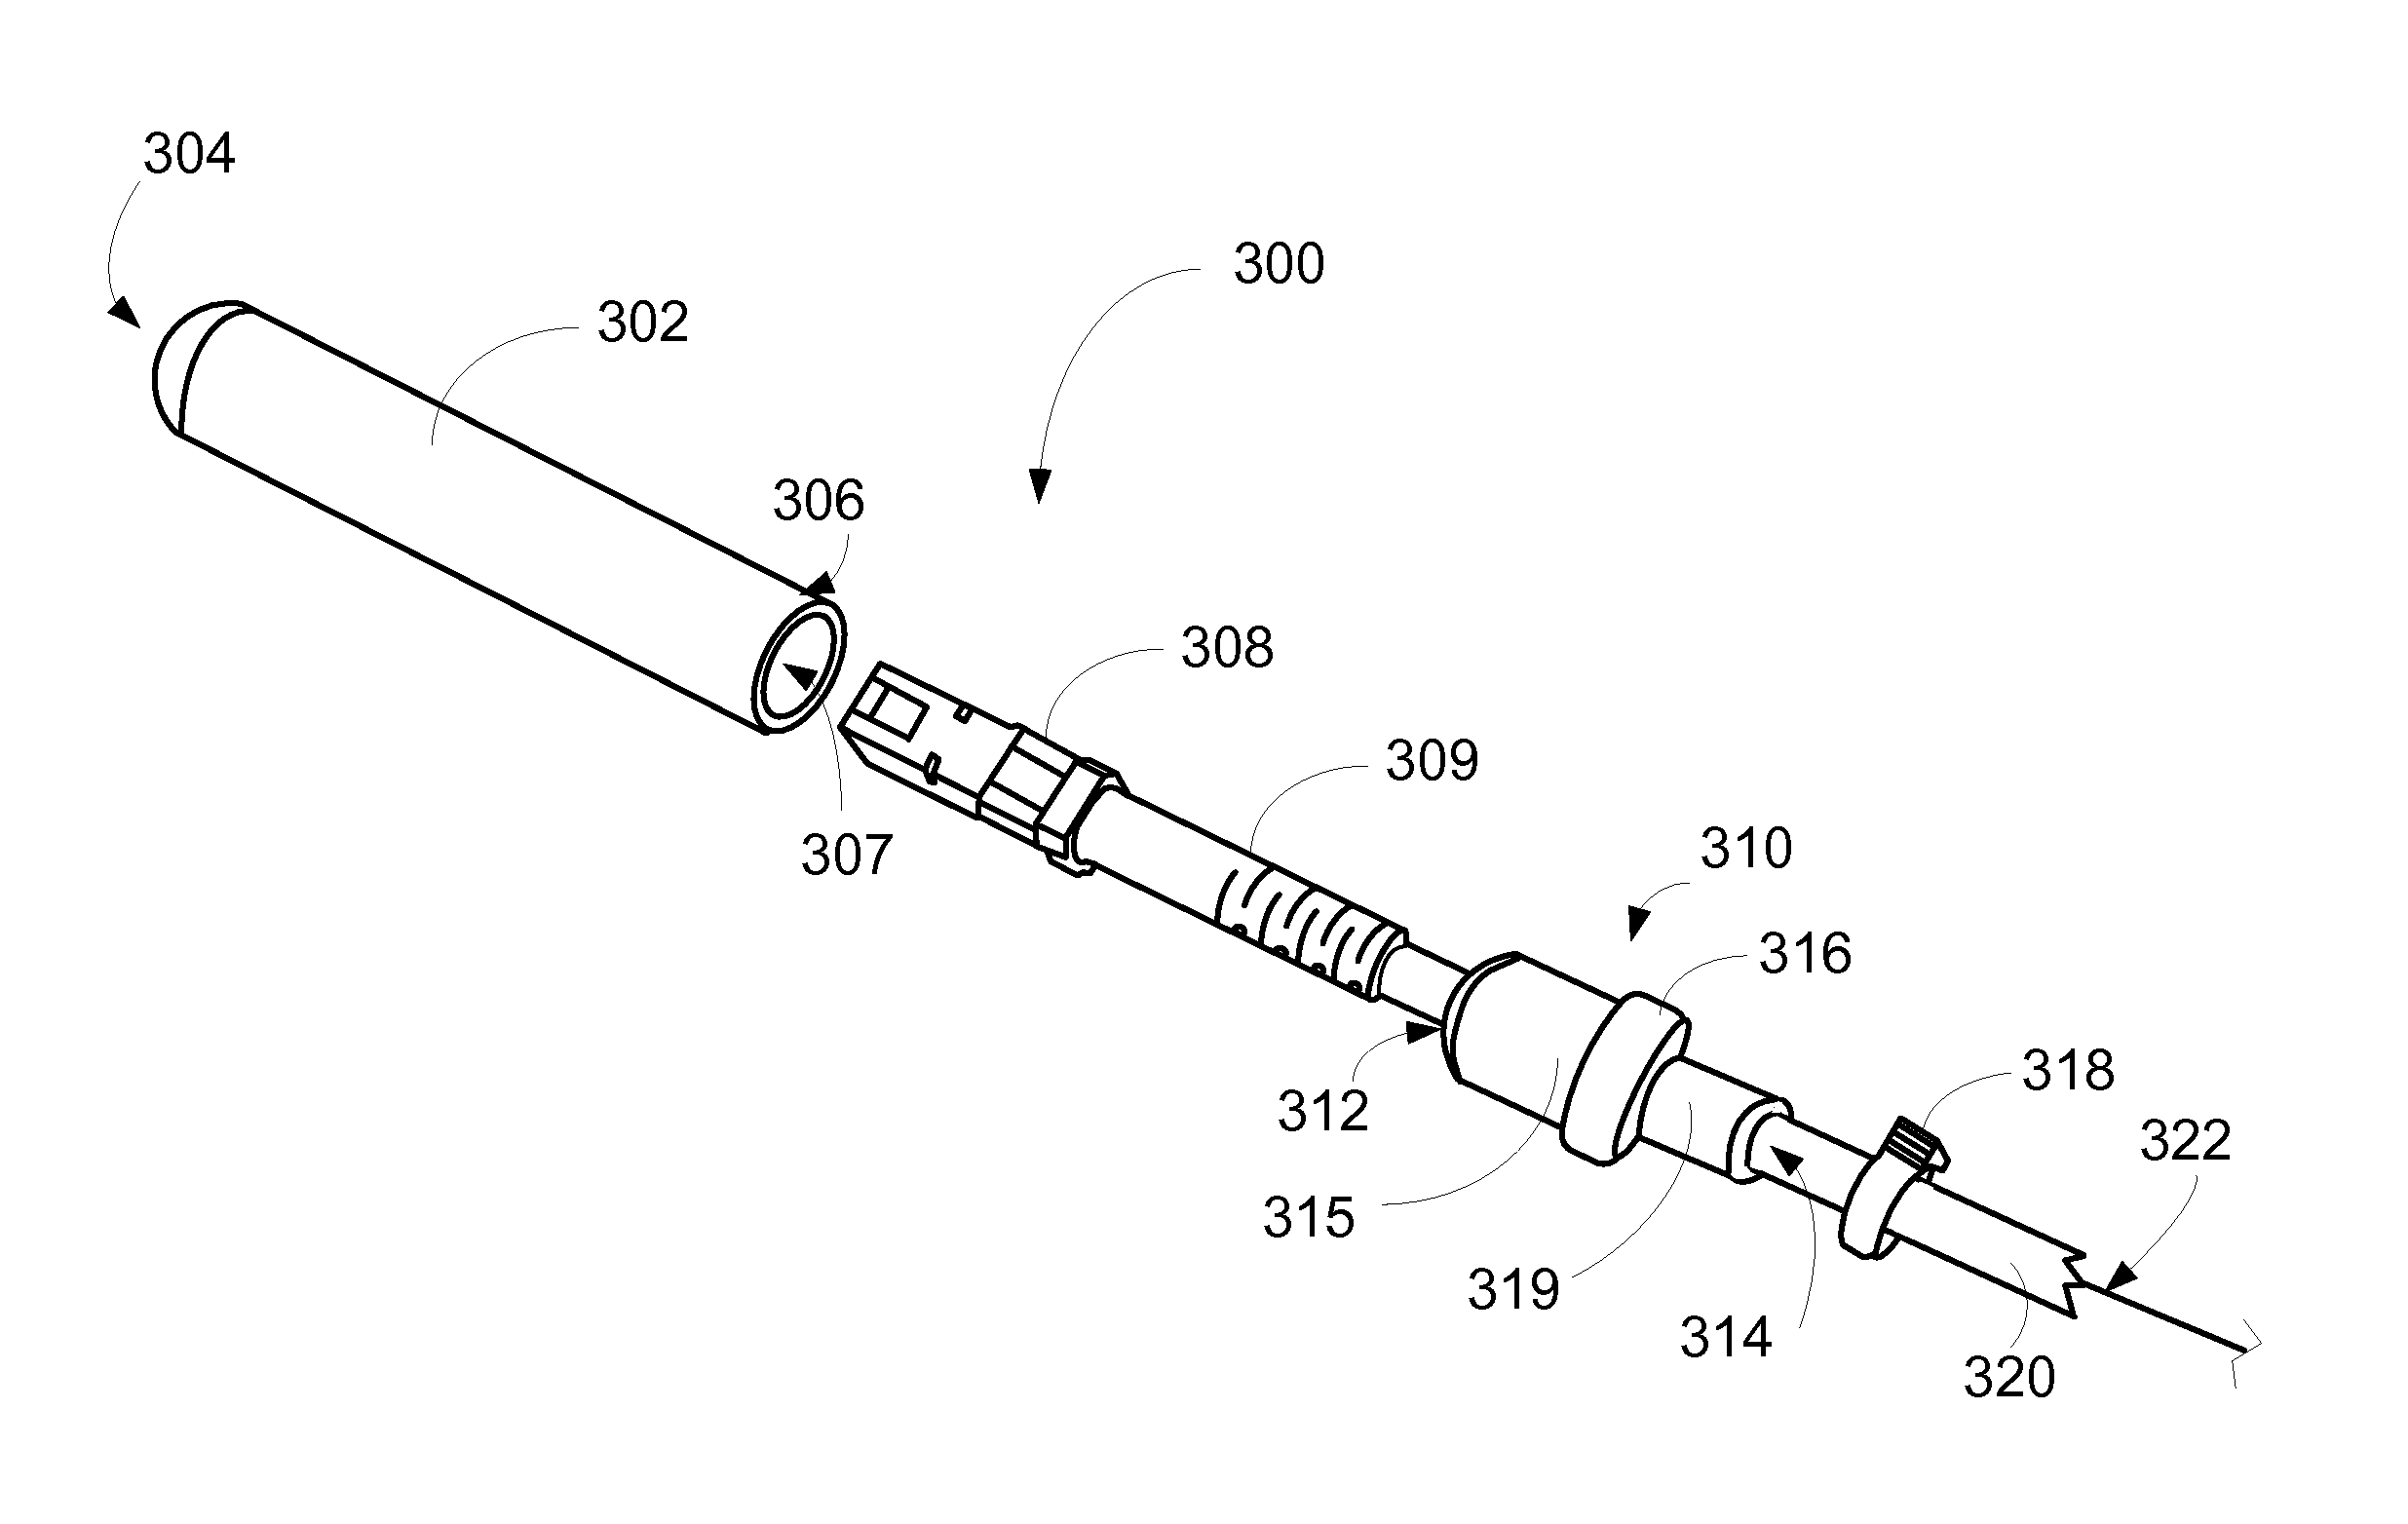 Connector cover for outside plant applications